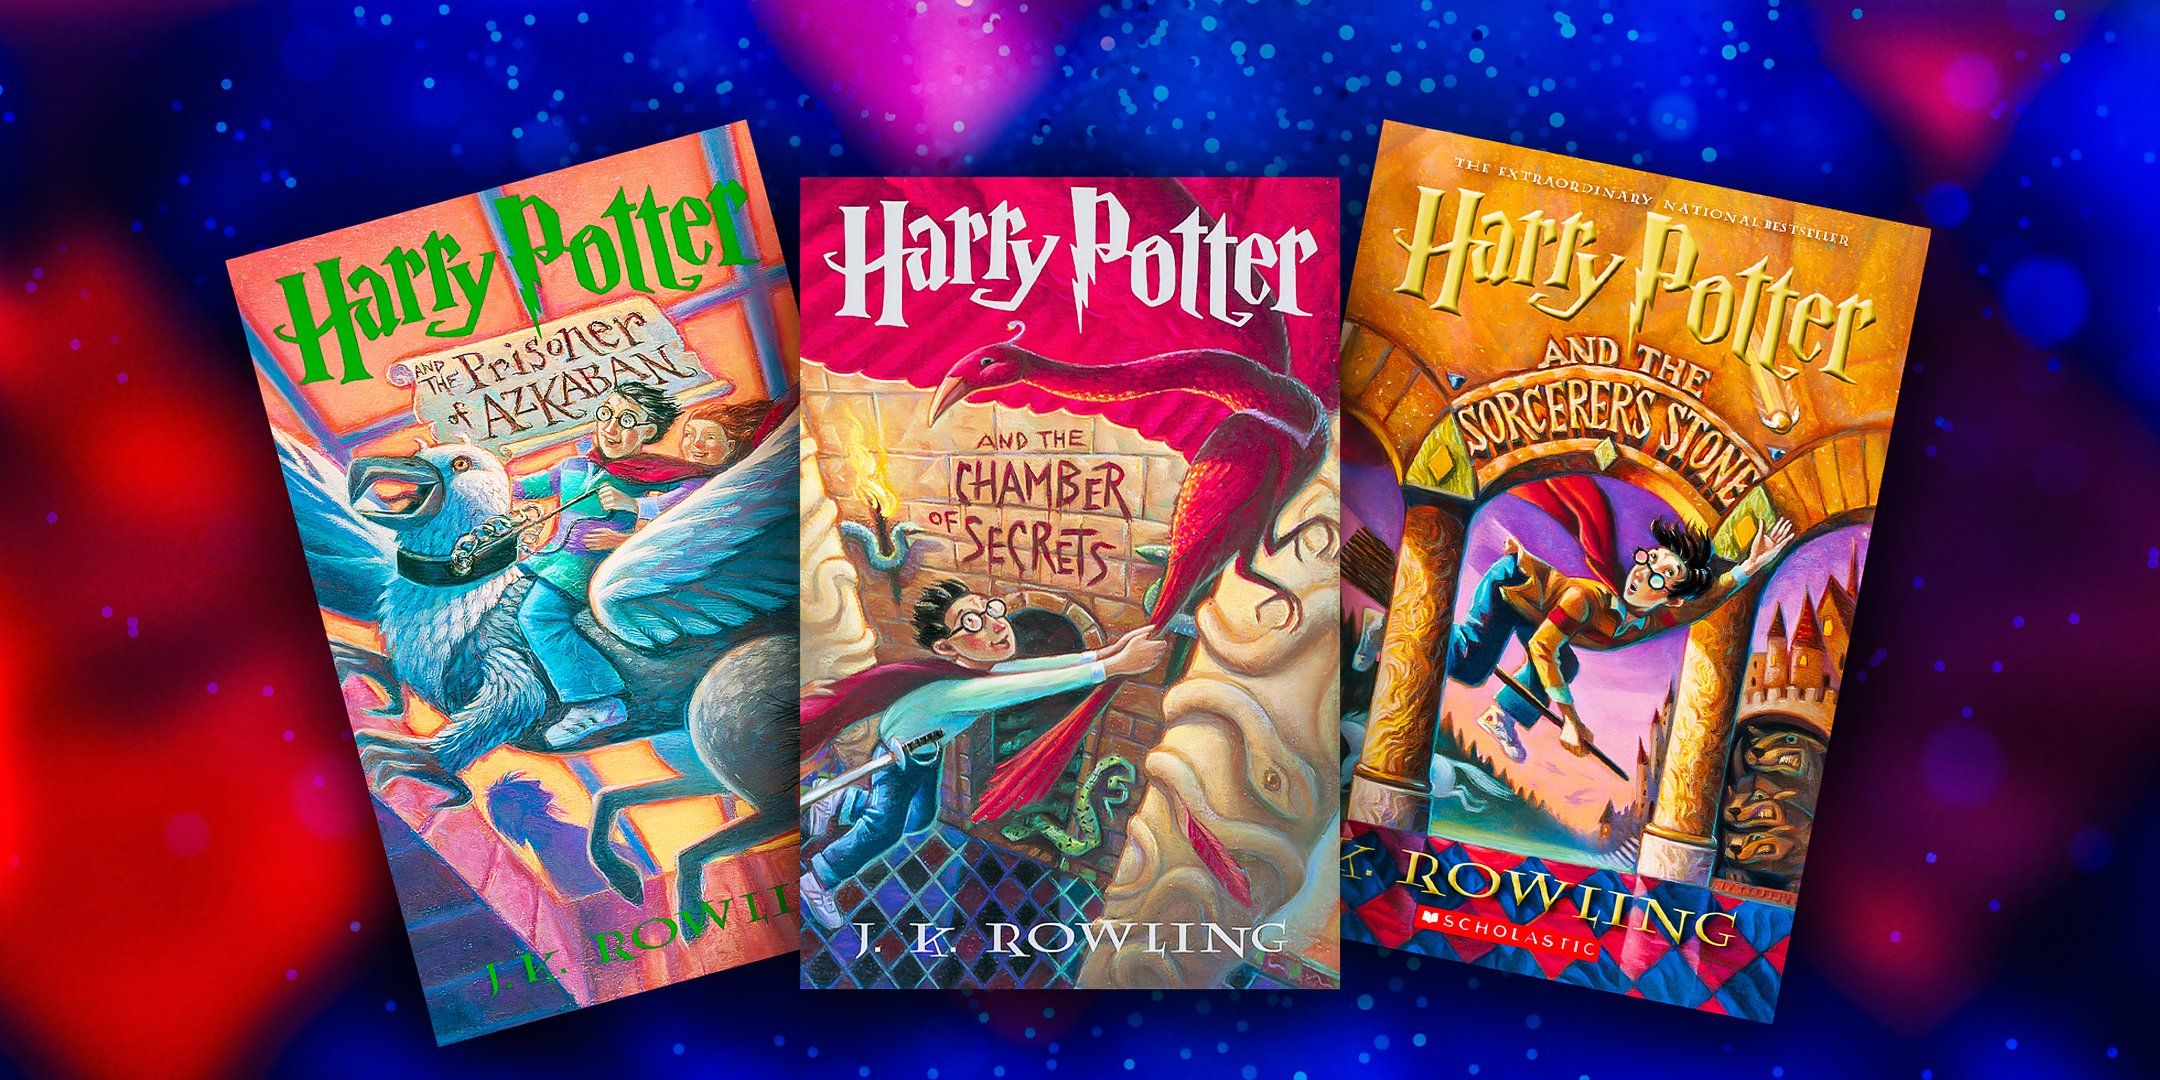 The covers of Harry Potter books 1, 2, and 3